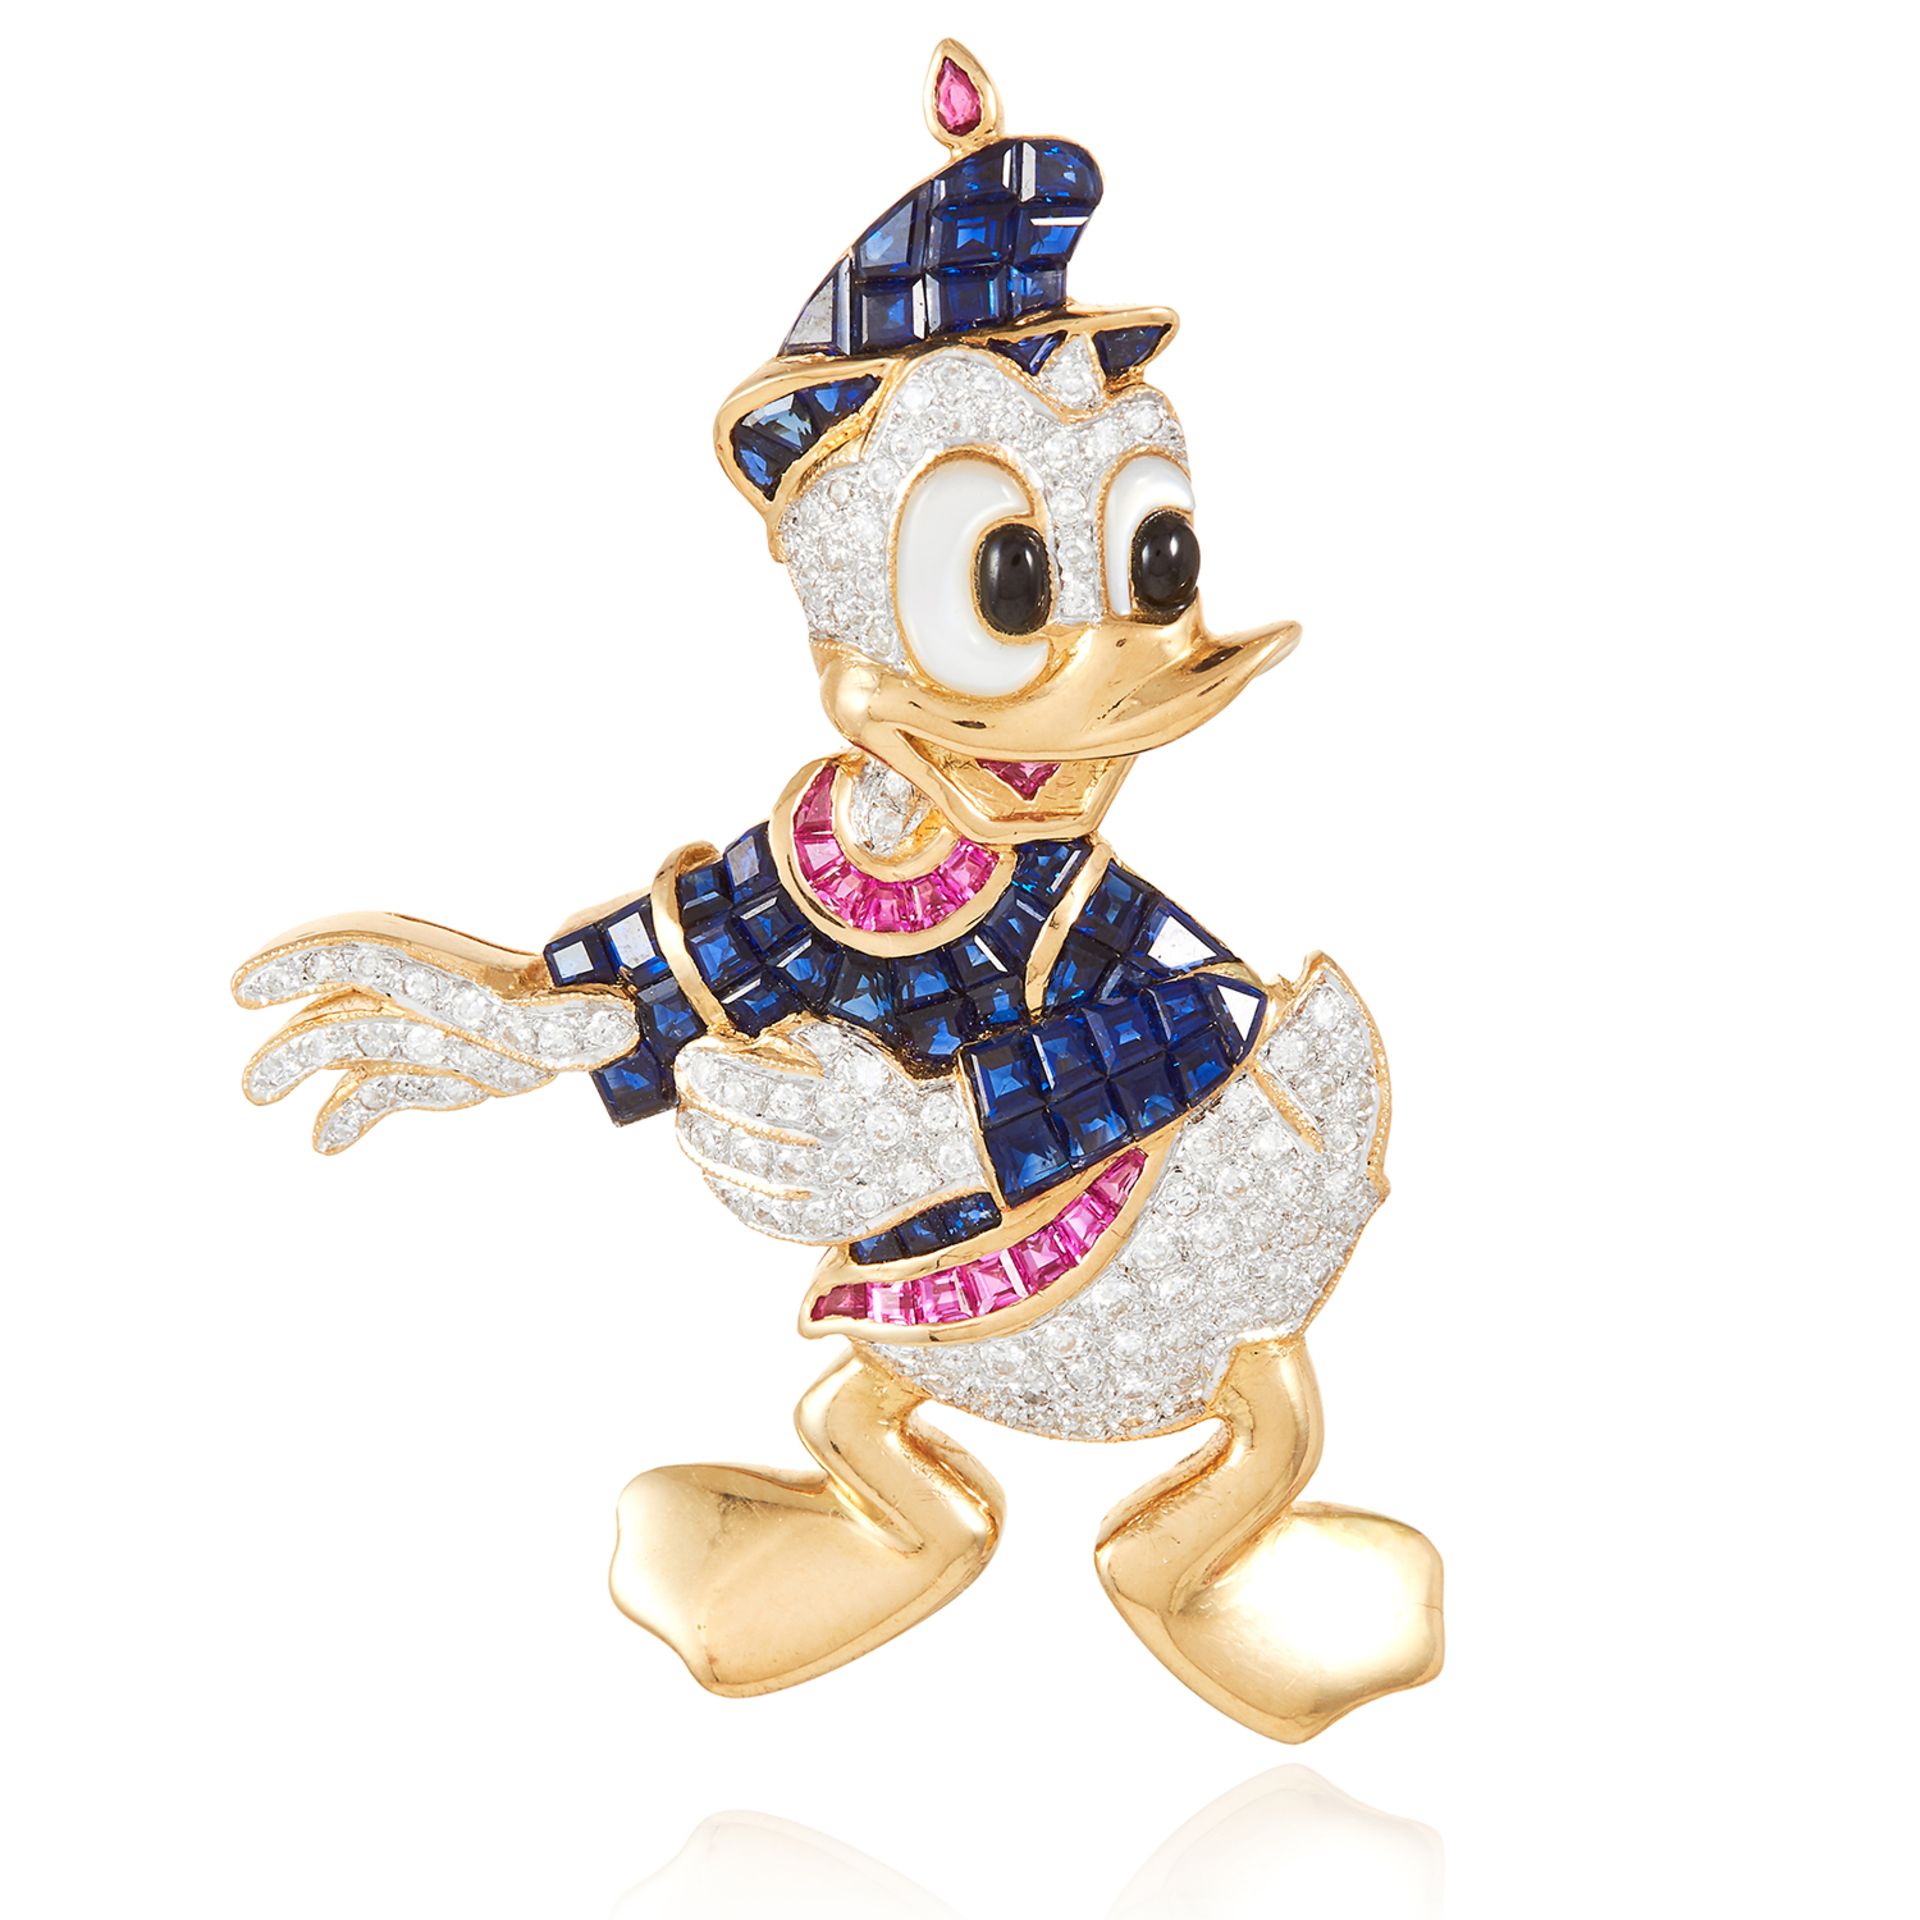 A JEWELLED DONALD DUCK BROOCH in 18ct yellow gold, designed to depict Disney's Donald Duck, his body